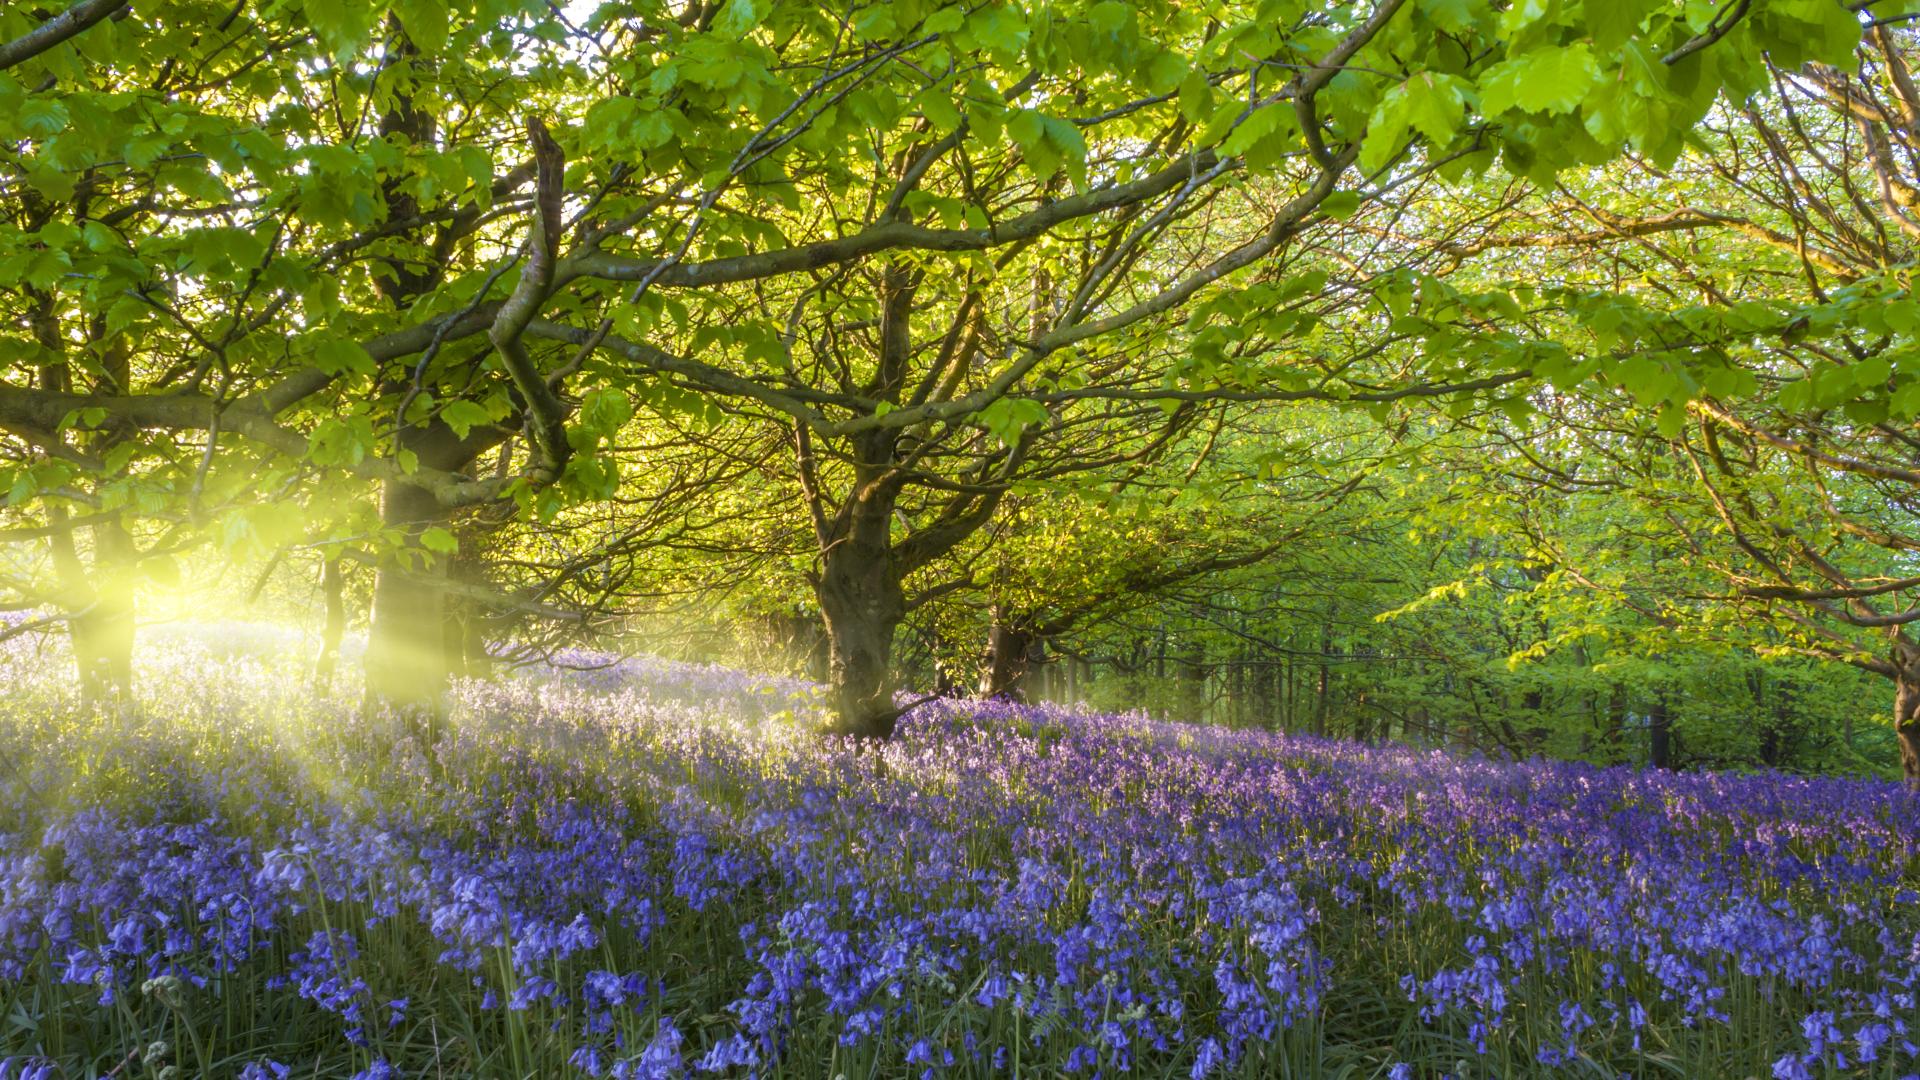 Sun shining through trees, a carpet of bluebells in foreground